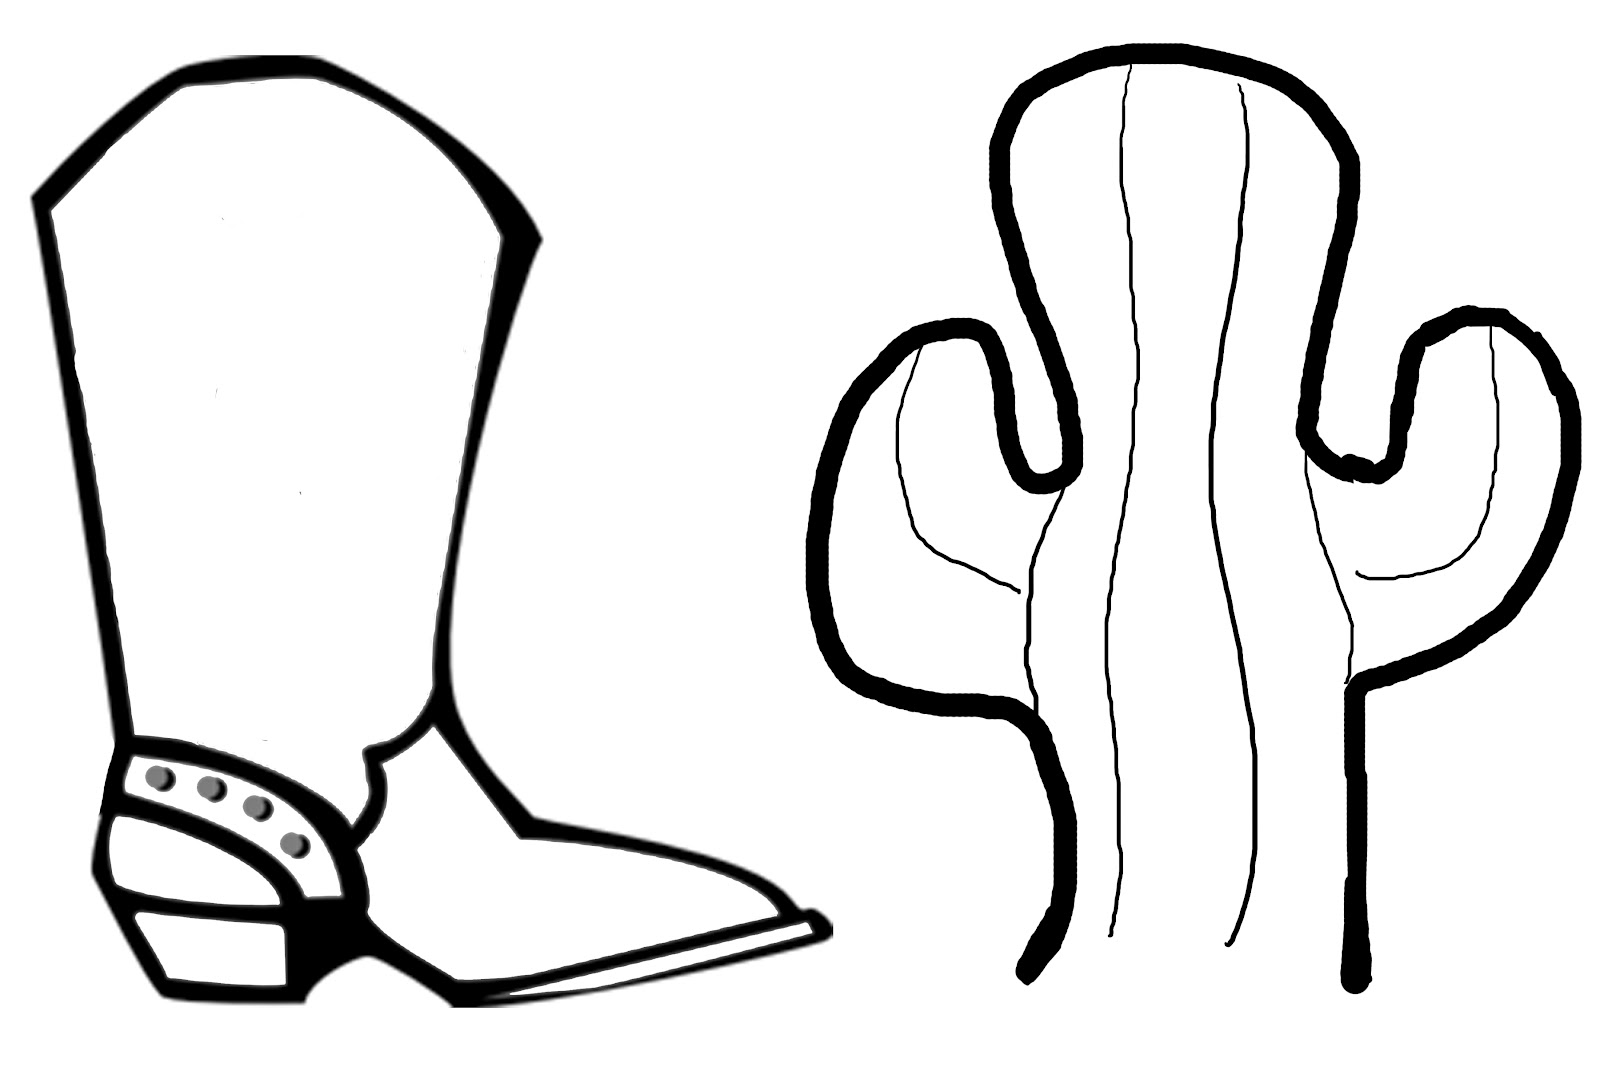 Boots Outline - ClipArt Best